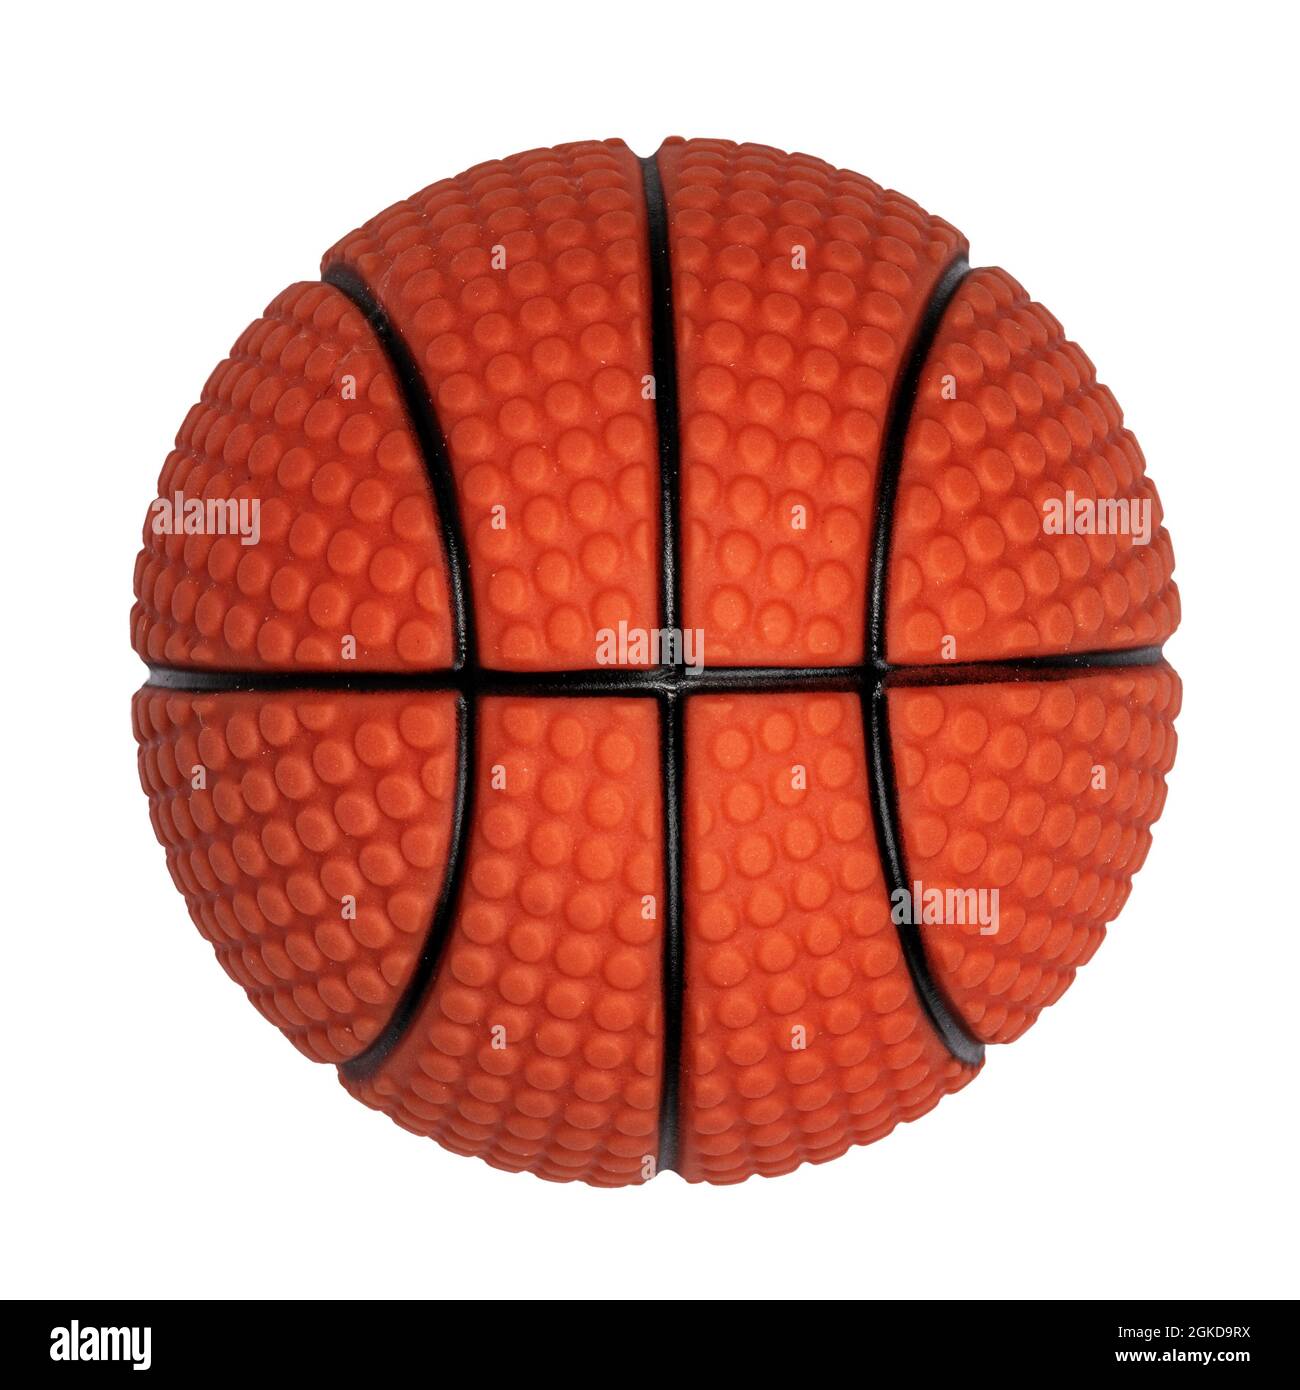 Top view of toy black and orange basketball. Isolated on a white background. Stock Photo